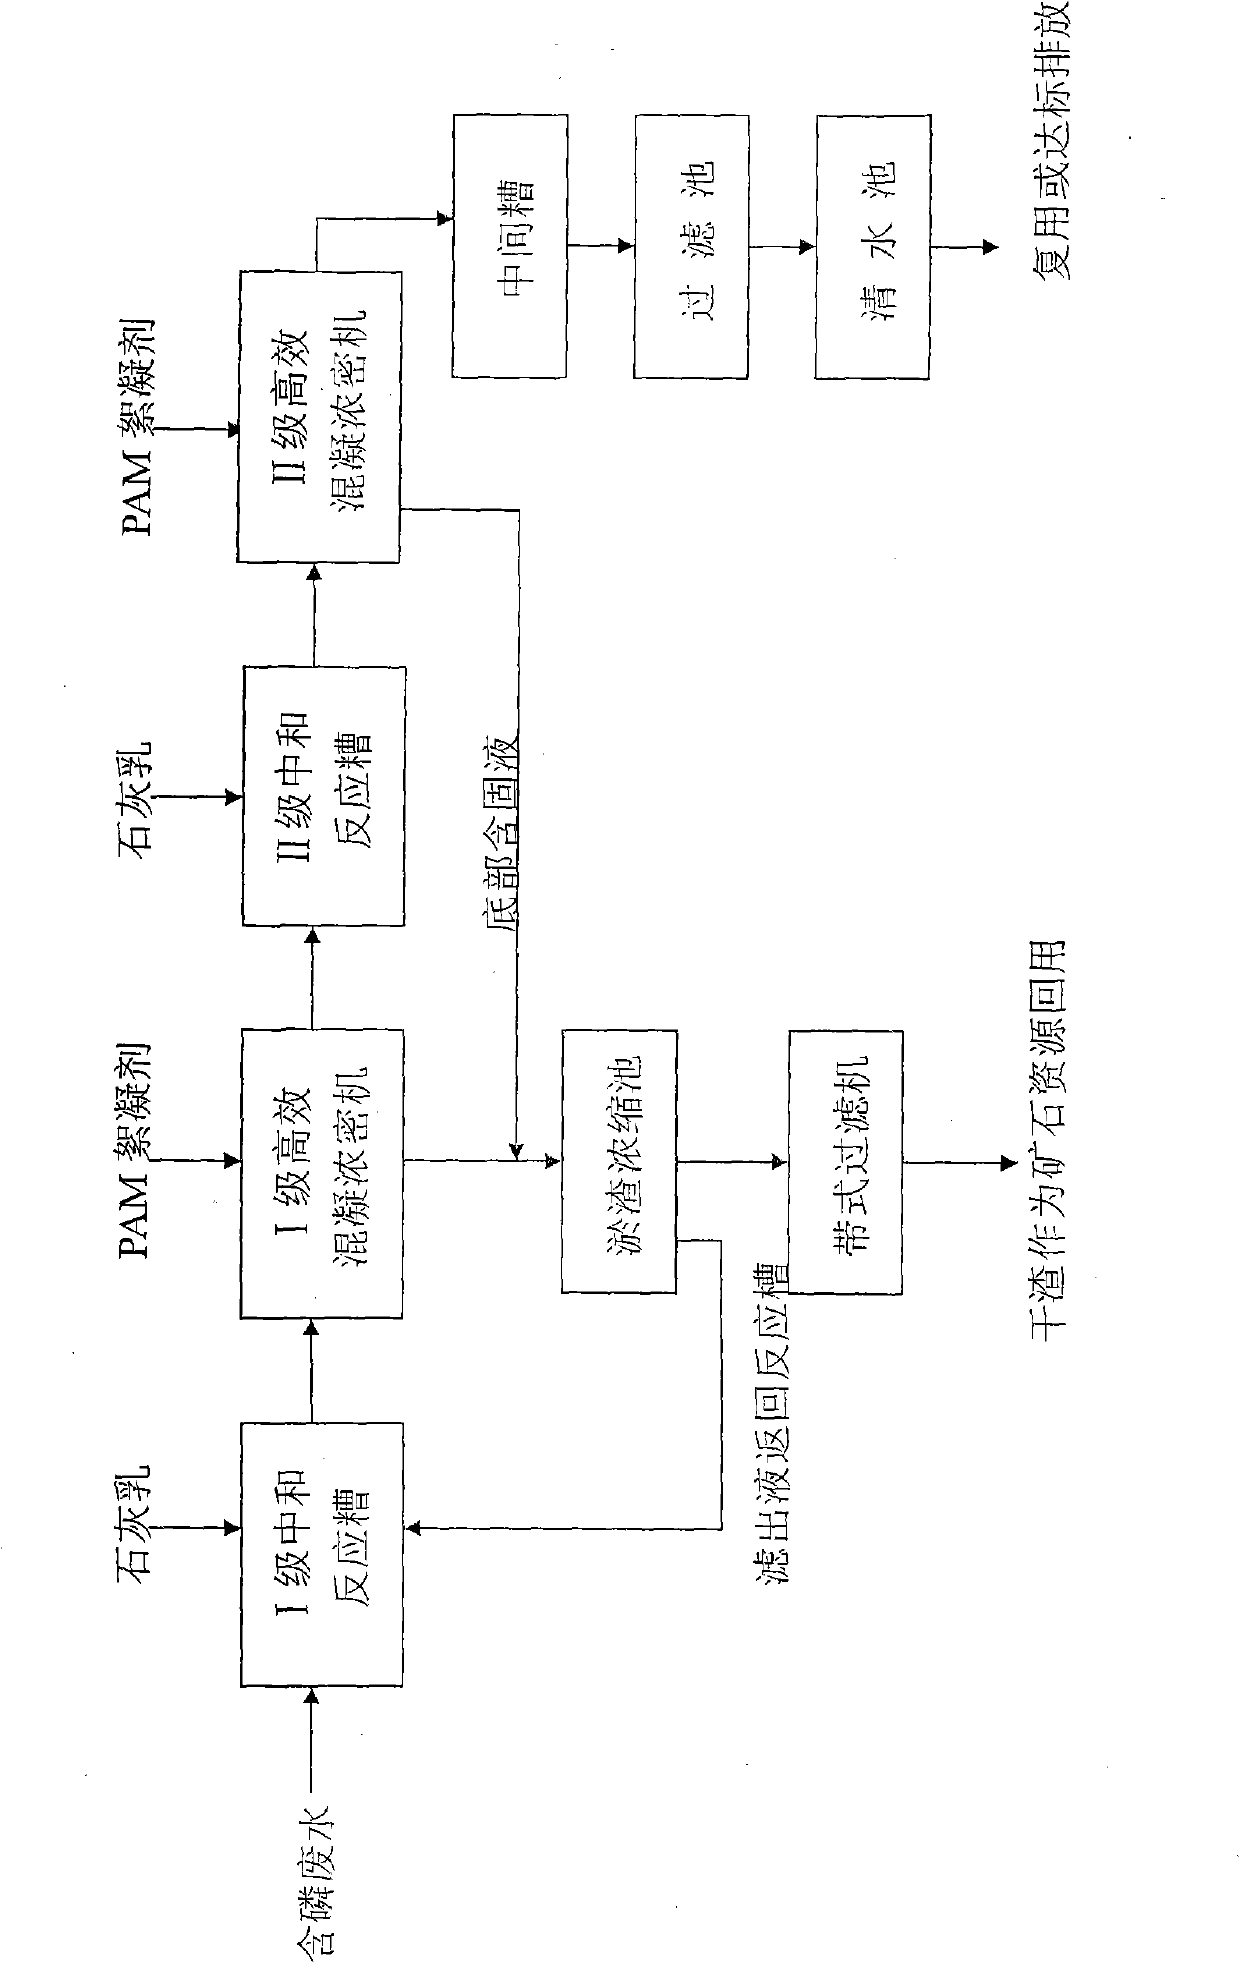 Treating method for phosphoric waste water and sludge generated in production process of phosphatic compound fertilizer